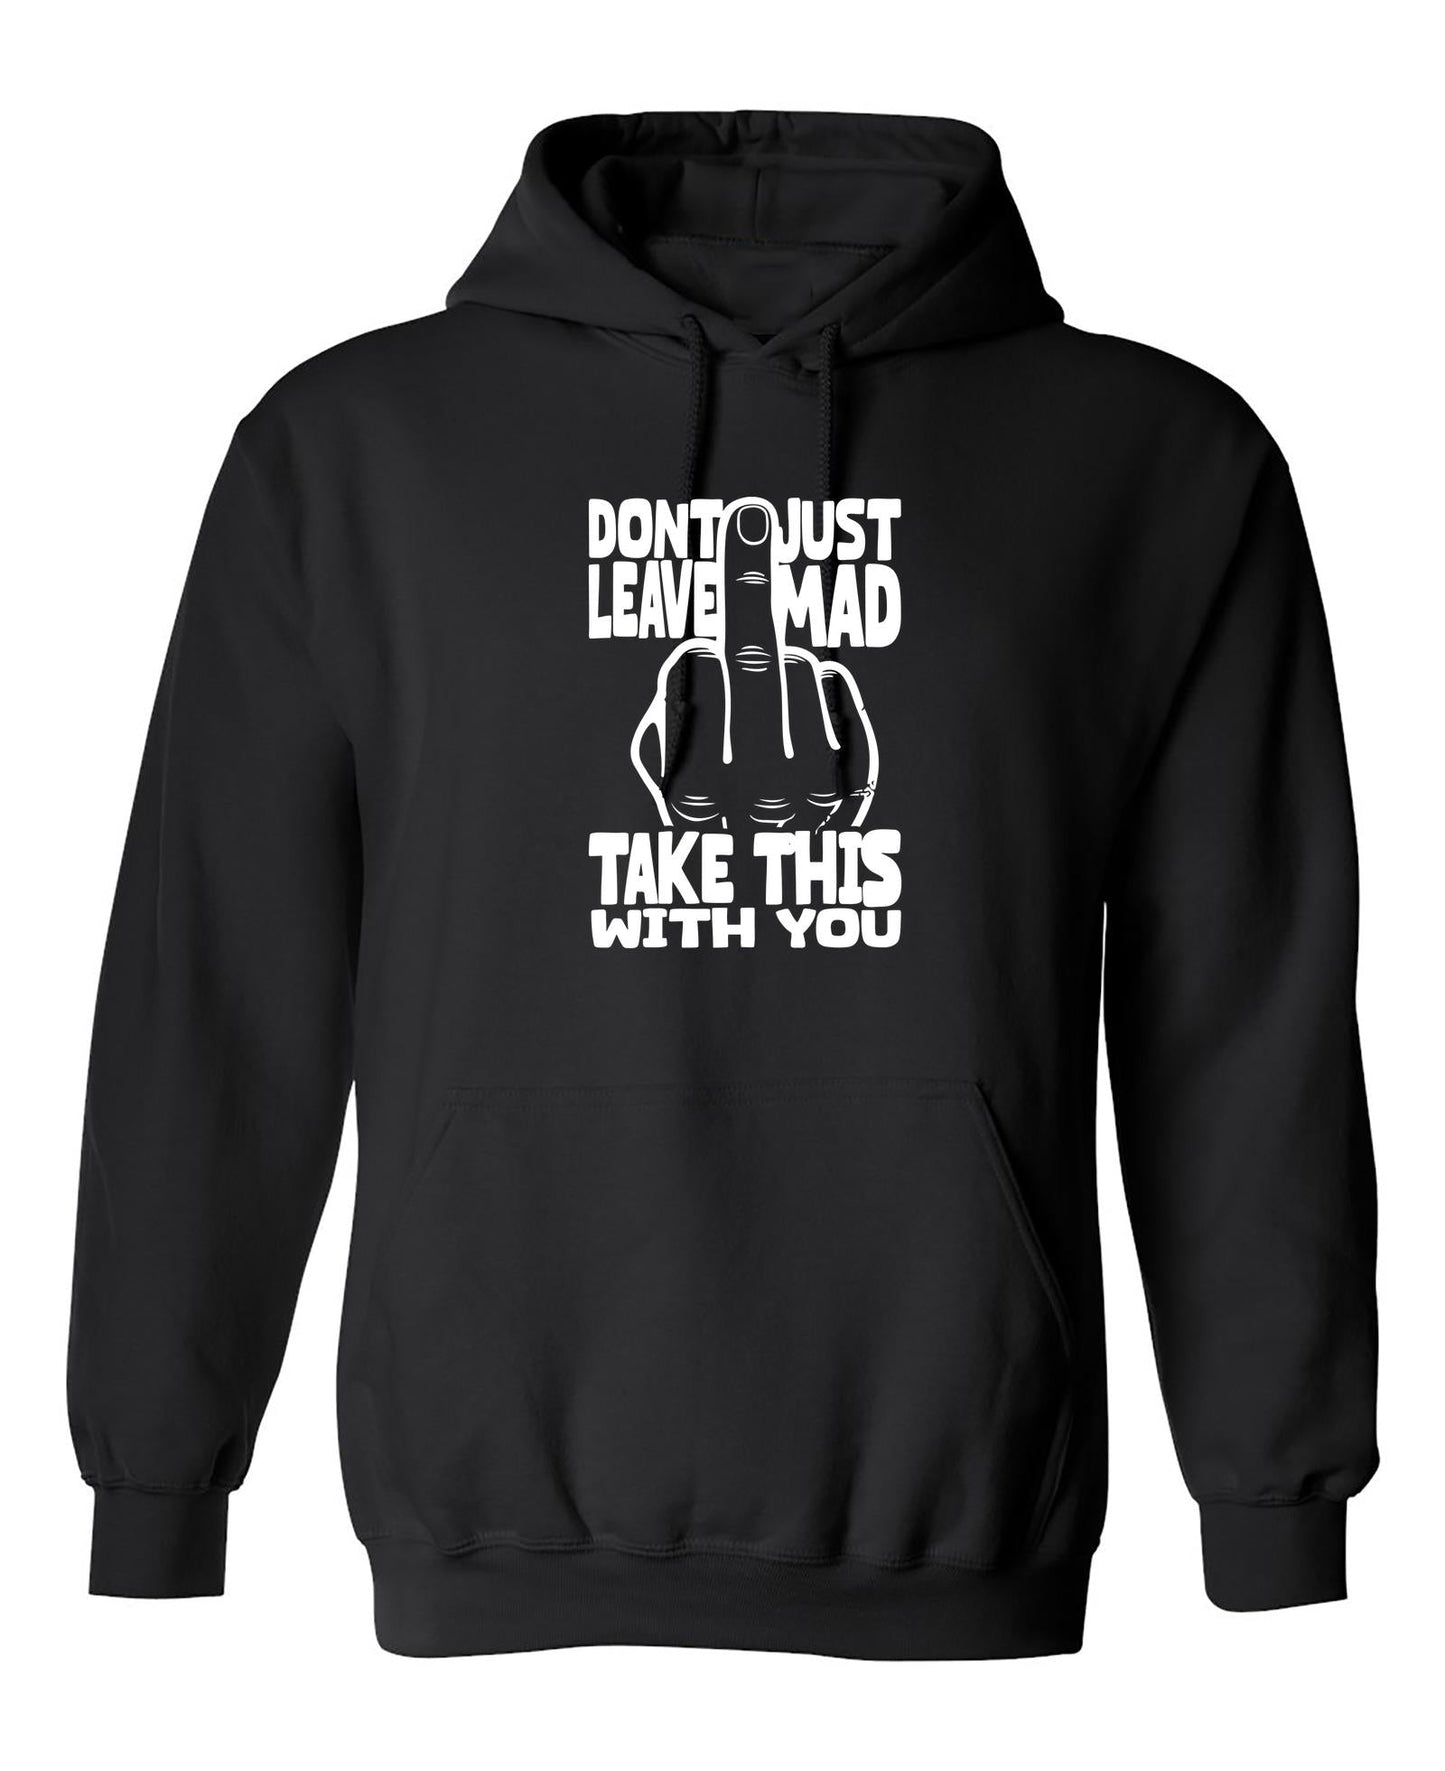 Funny T-Shirts design "Don’t Just Leave Mad"